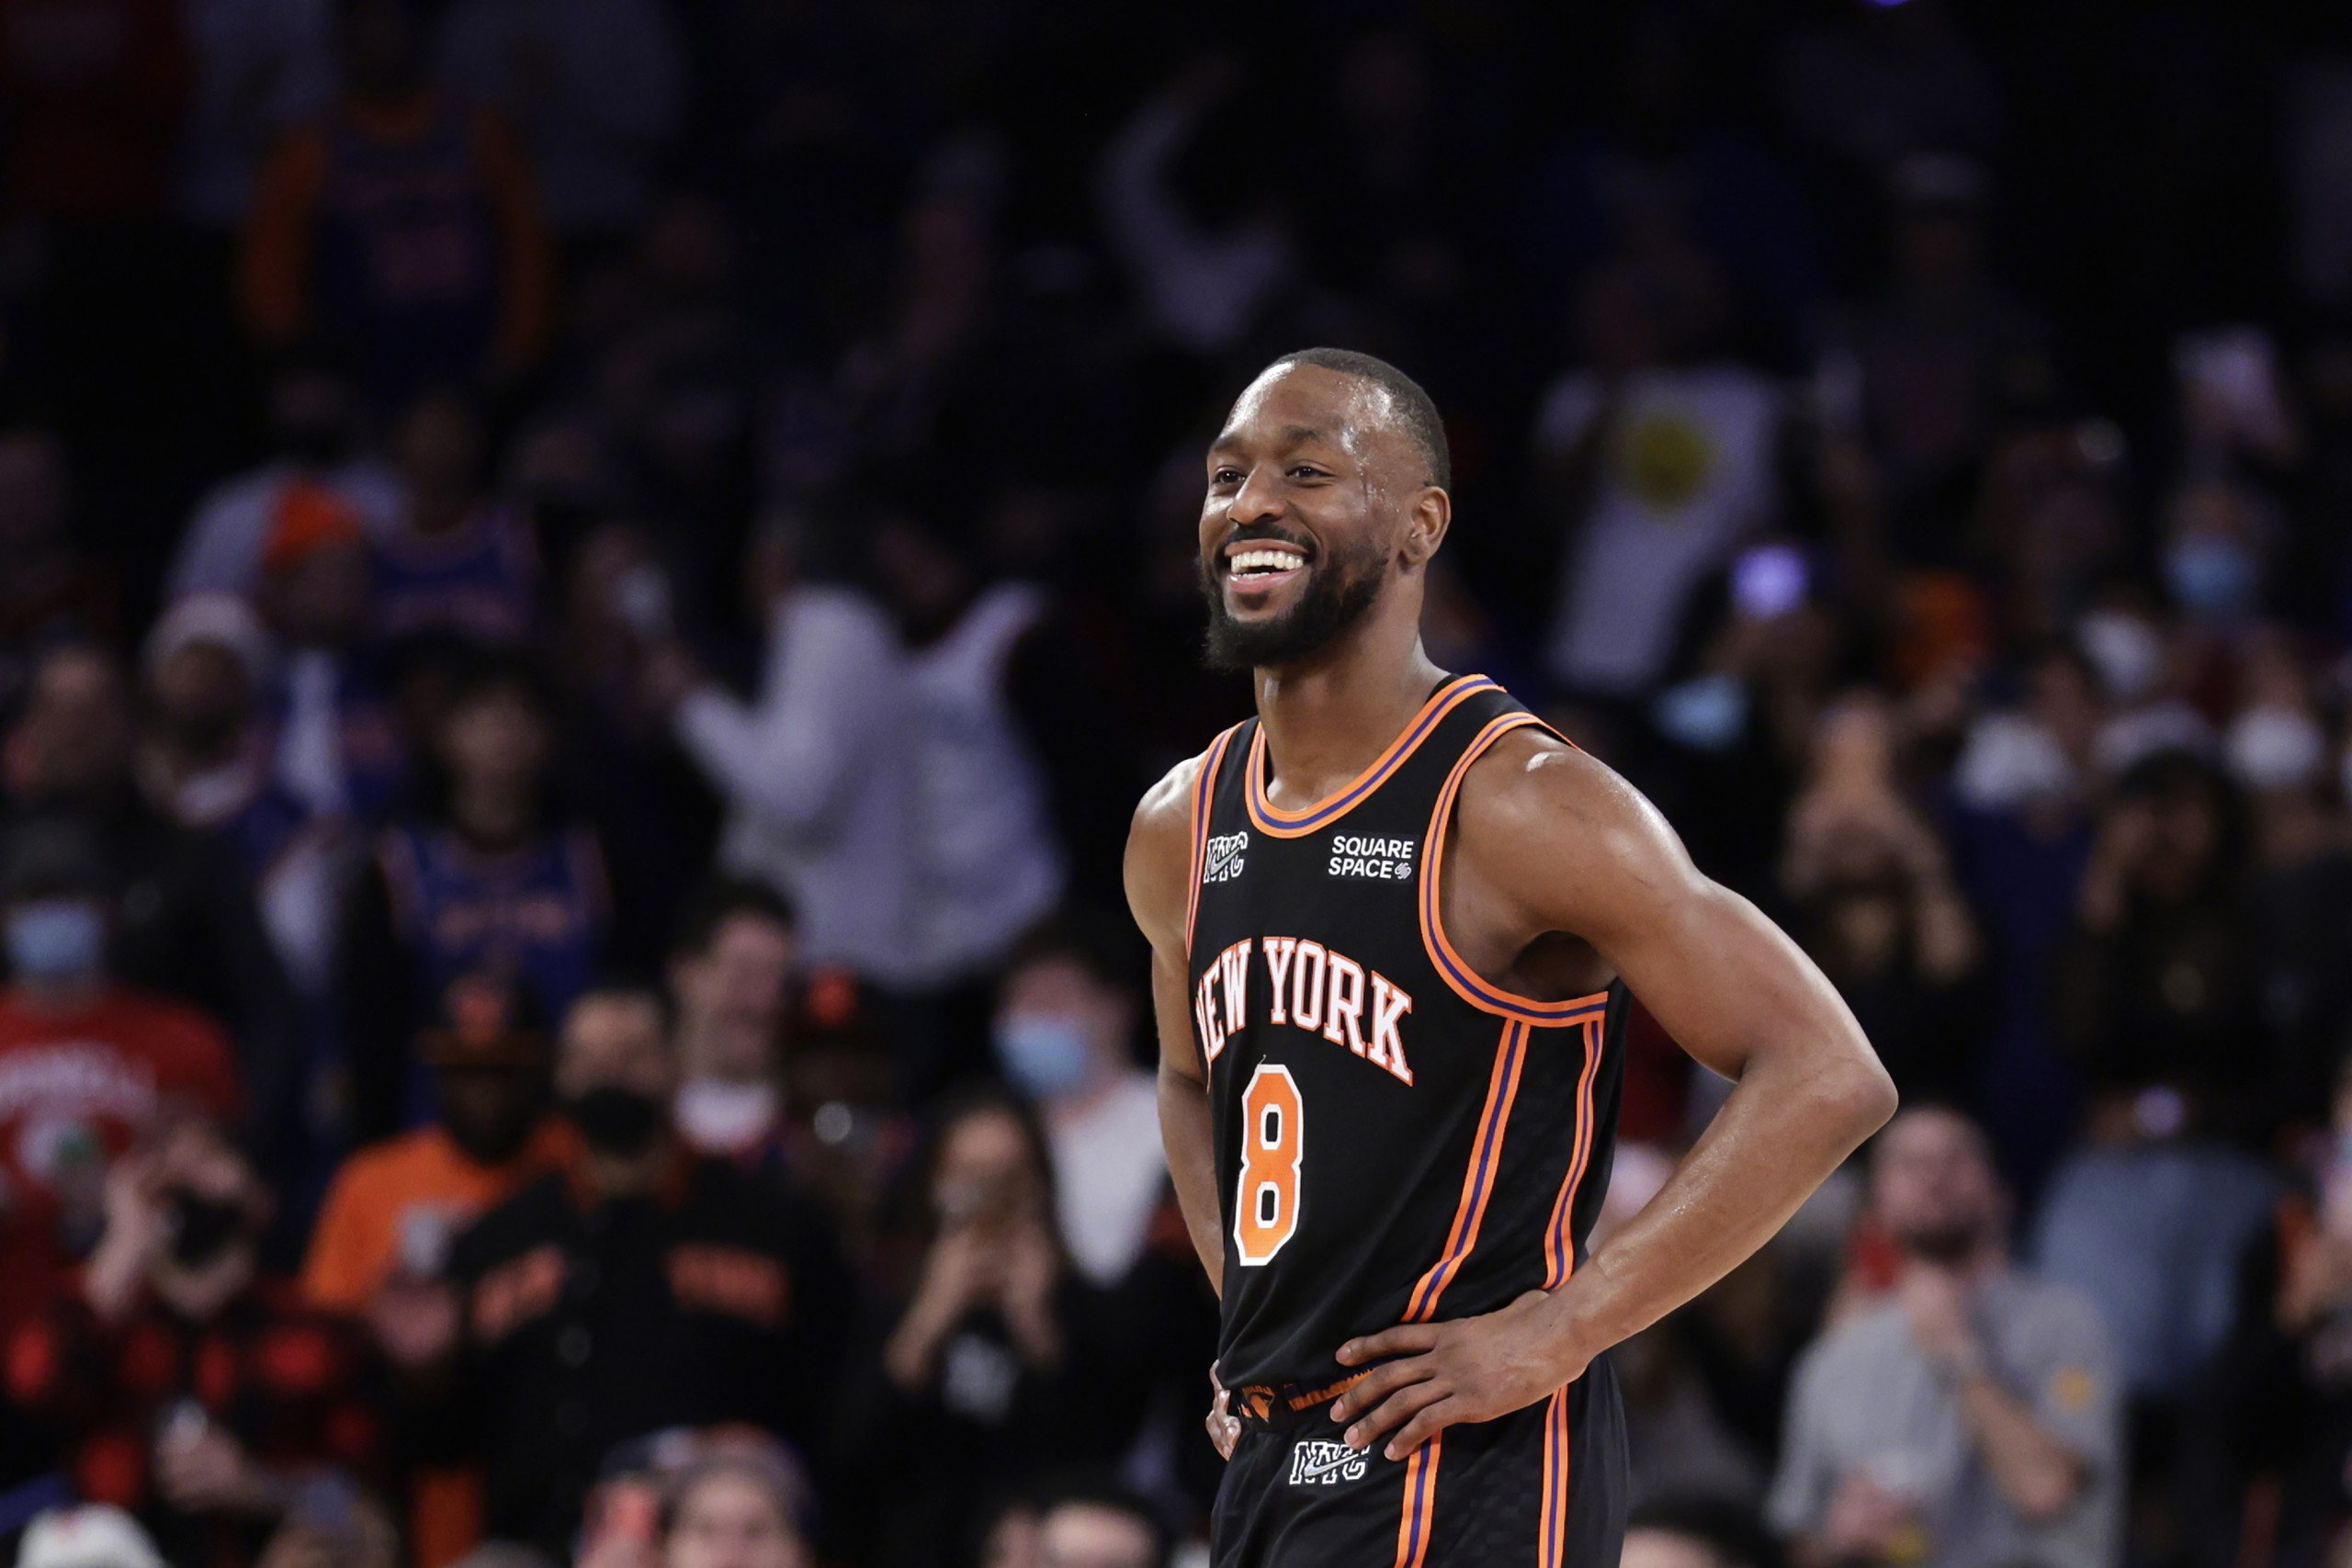 New York Knicks guard Kemba Walker (8) reacts against the Atlanta Hawks during the second half of an NBA basketball game Saturday, Dec. 25, 2021, in New York. The Knicks won 101-87. (AP Photo/Adam Hunger)